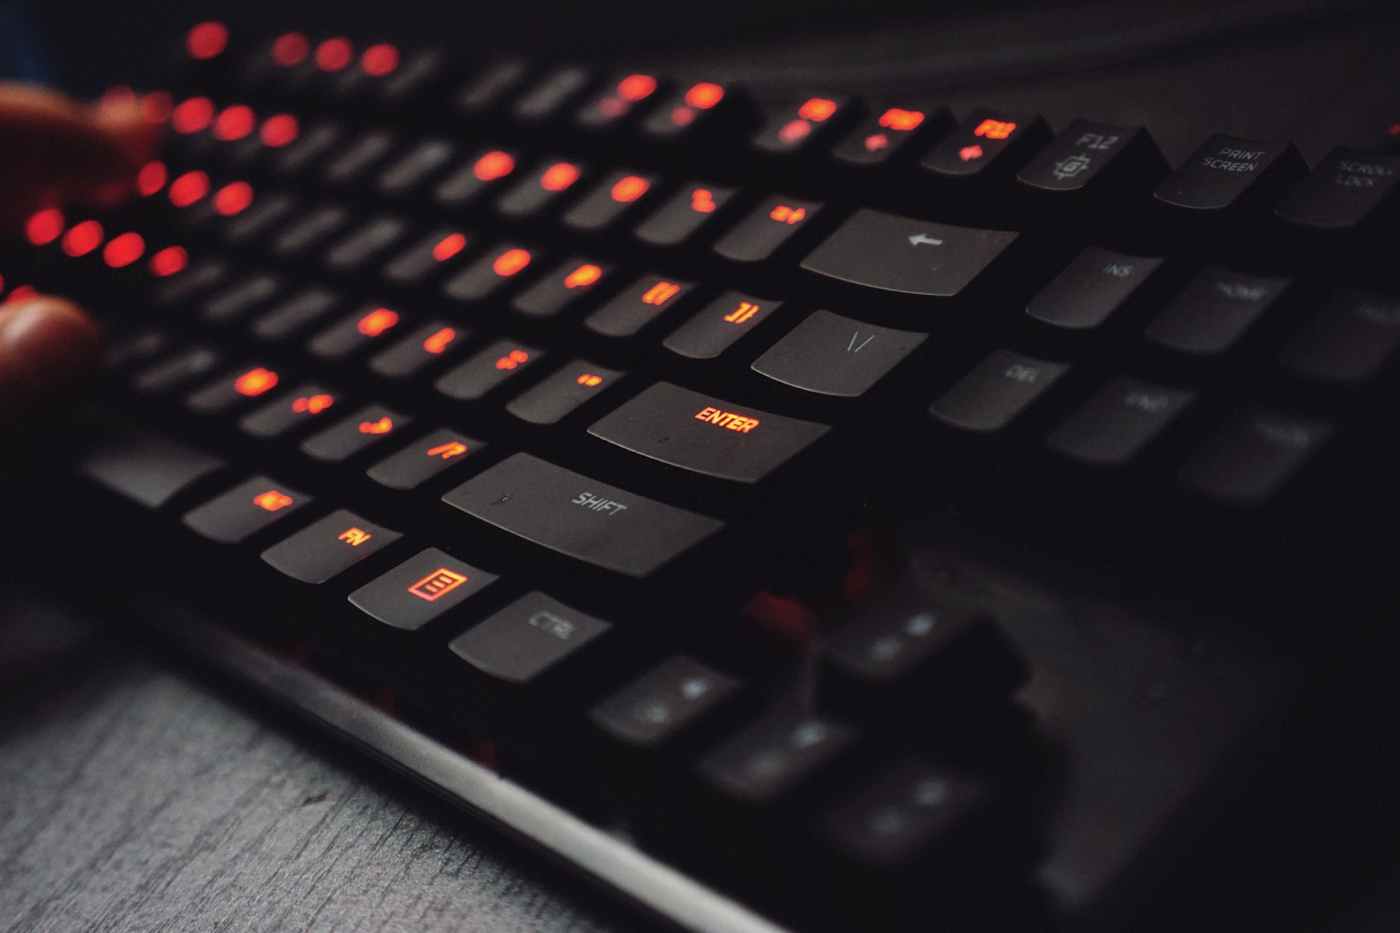 Keyboard image from pexels